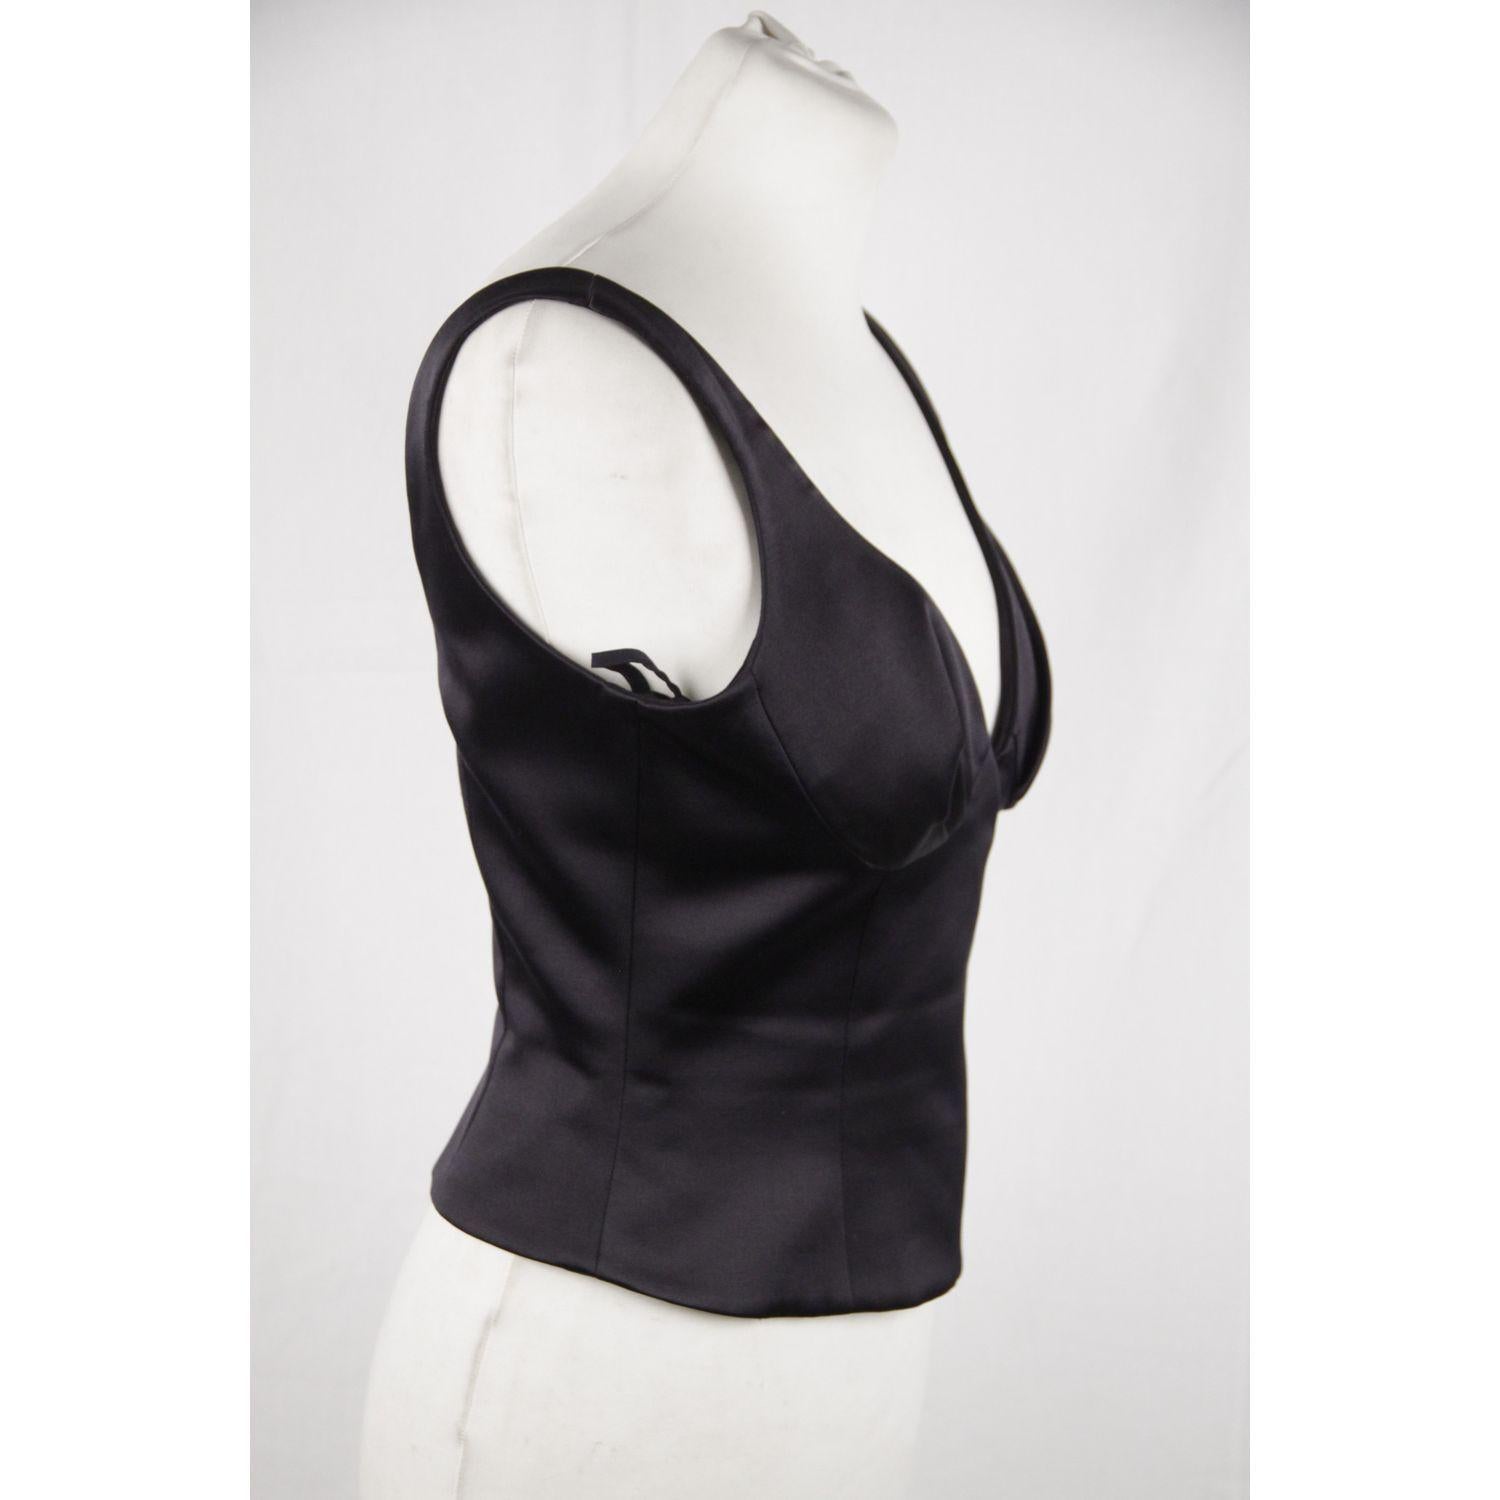 MATERIAL: Silk, Wool COLOR: Black MODEL: Tank Top GENDER: Women SIZE: Extra Small COUNTRY OF MANUFACTURE: Italy Condition CONDITION DETAILS: B :GOOD CONDITION - Some light wear of use - A couple of small white marks on the front due to storage